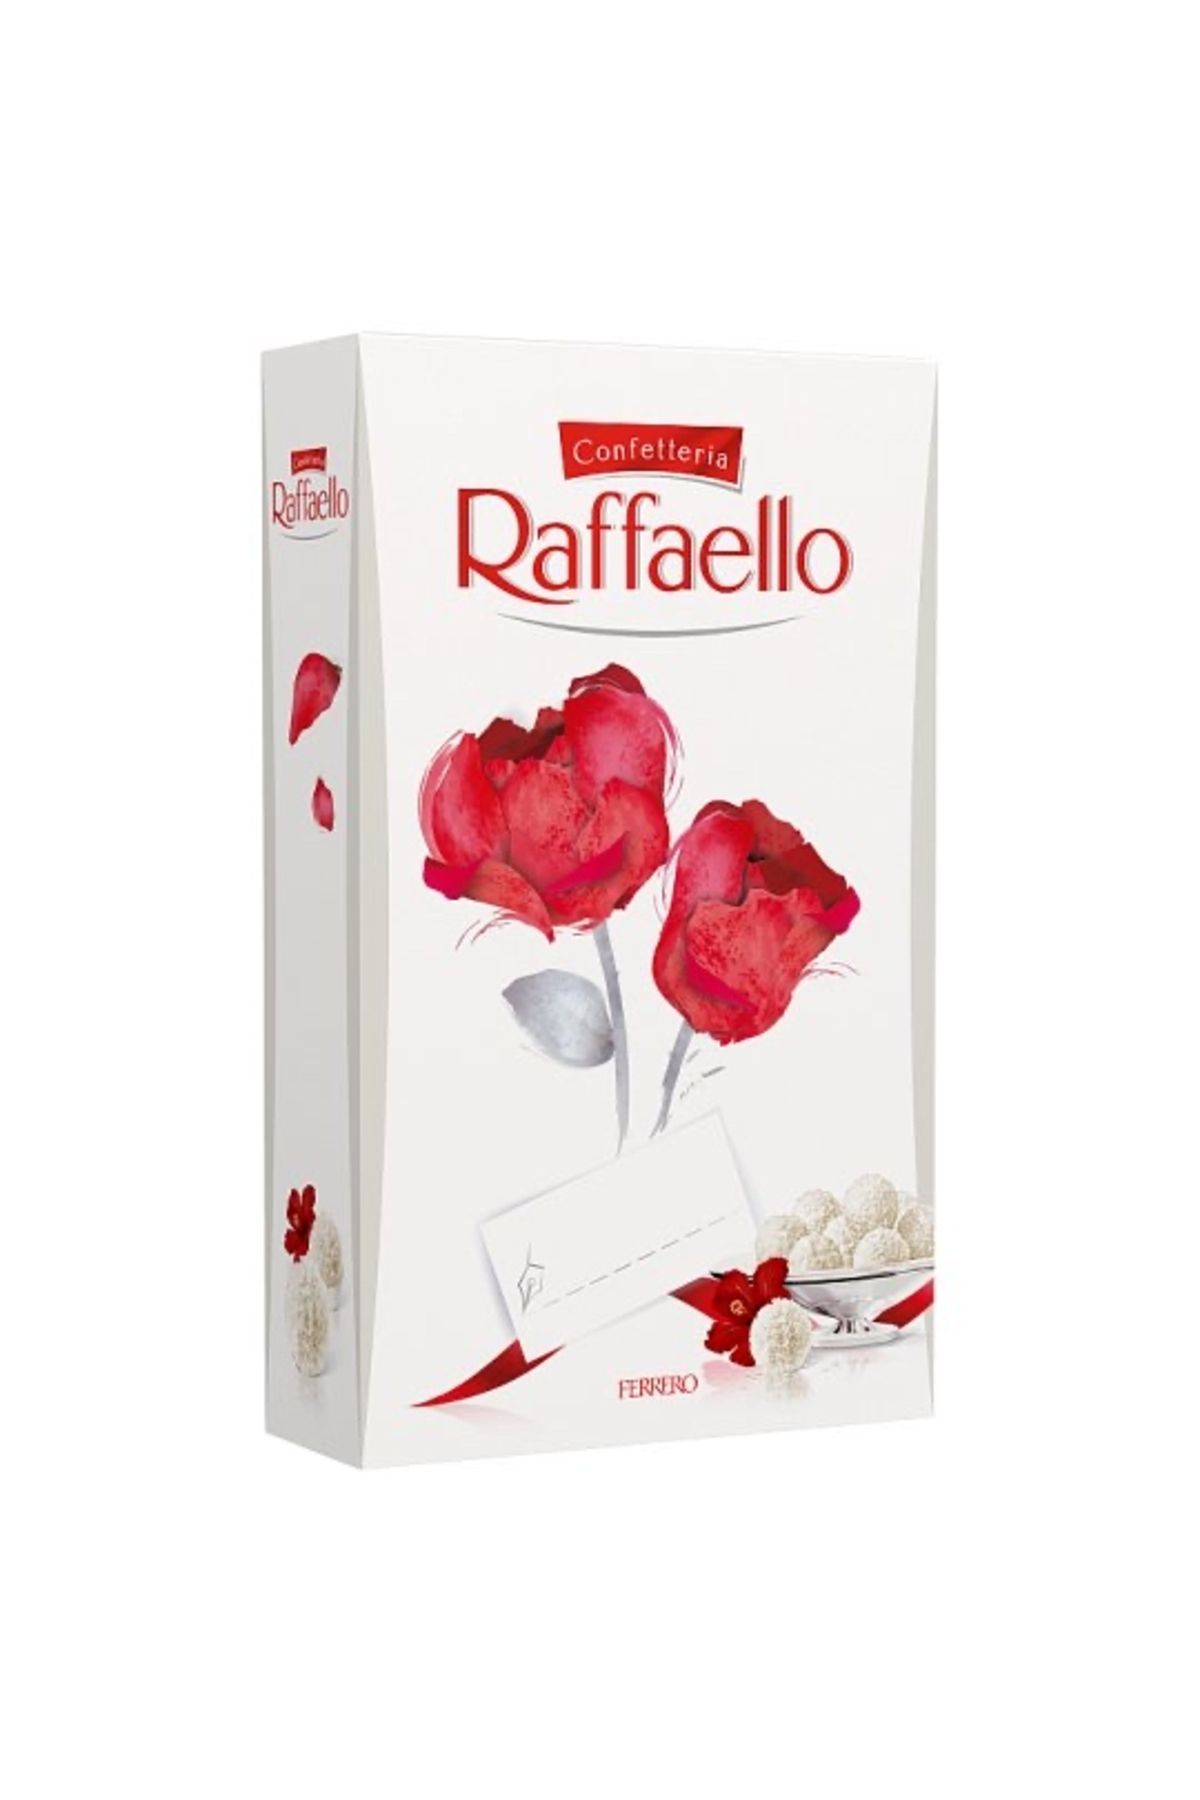 Raffaello Crisp Coconut Speciality with Smooth Coconut Filling and a Whole Almond 80 g